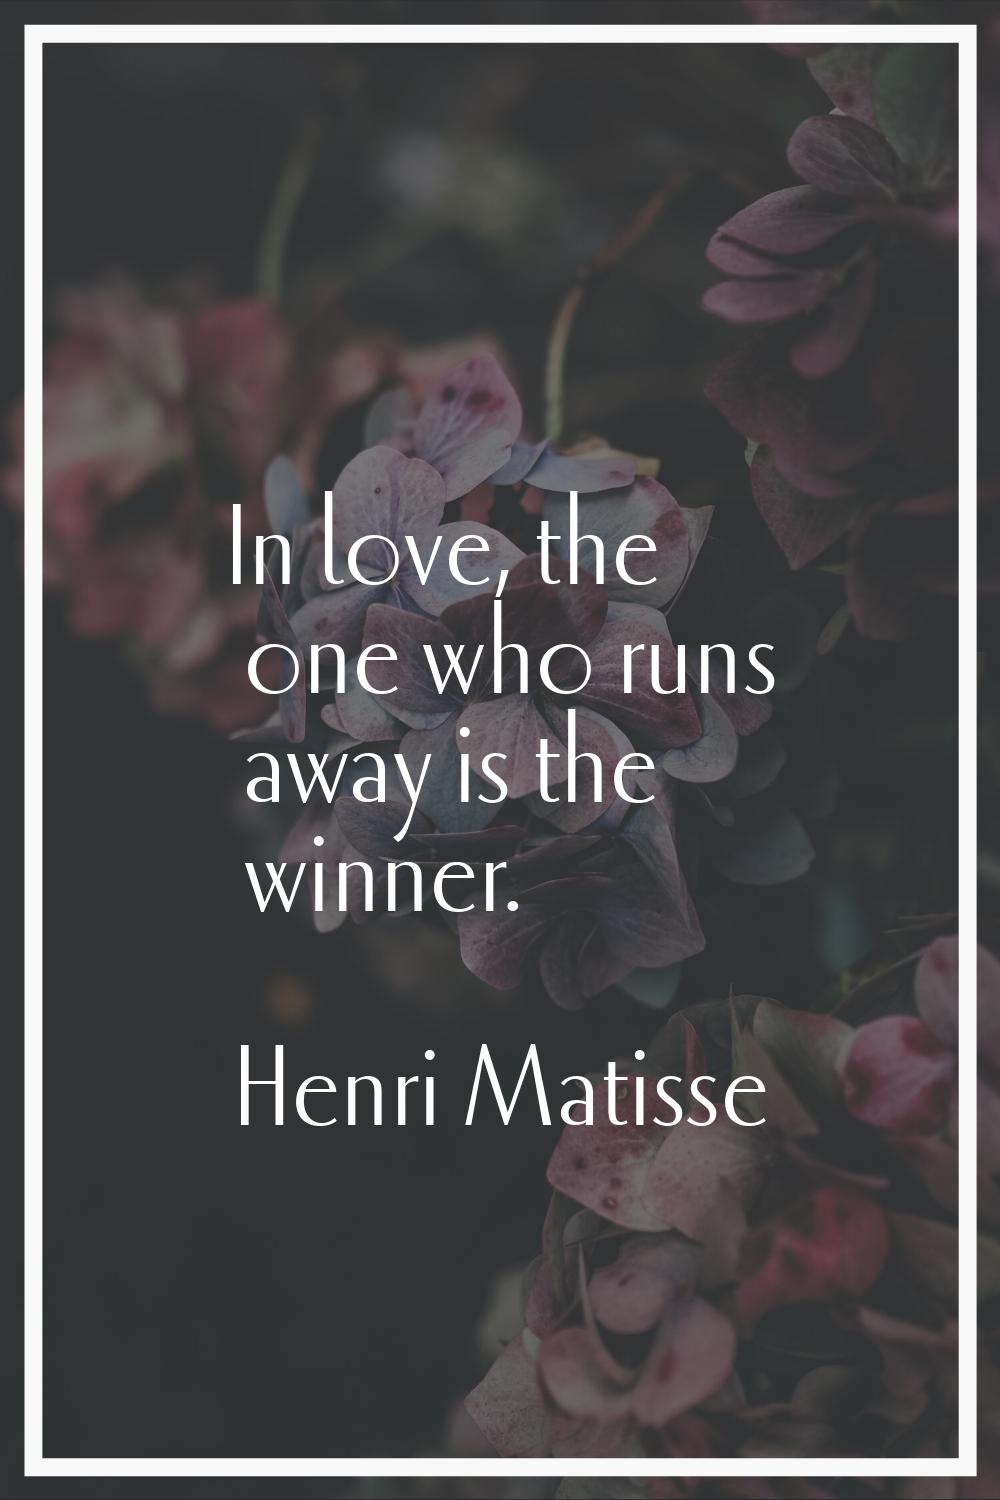 In love, the one who runs away is the winner.